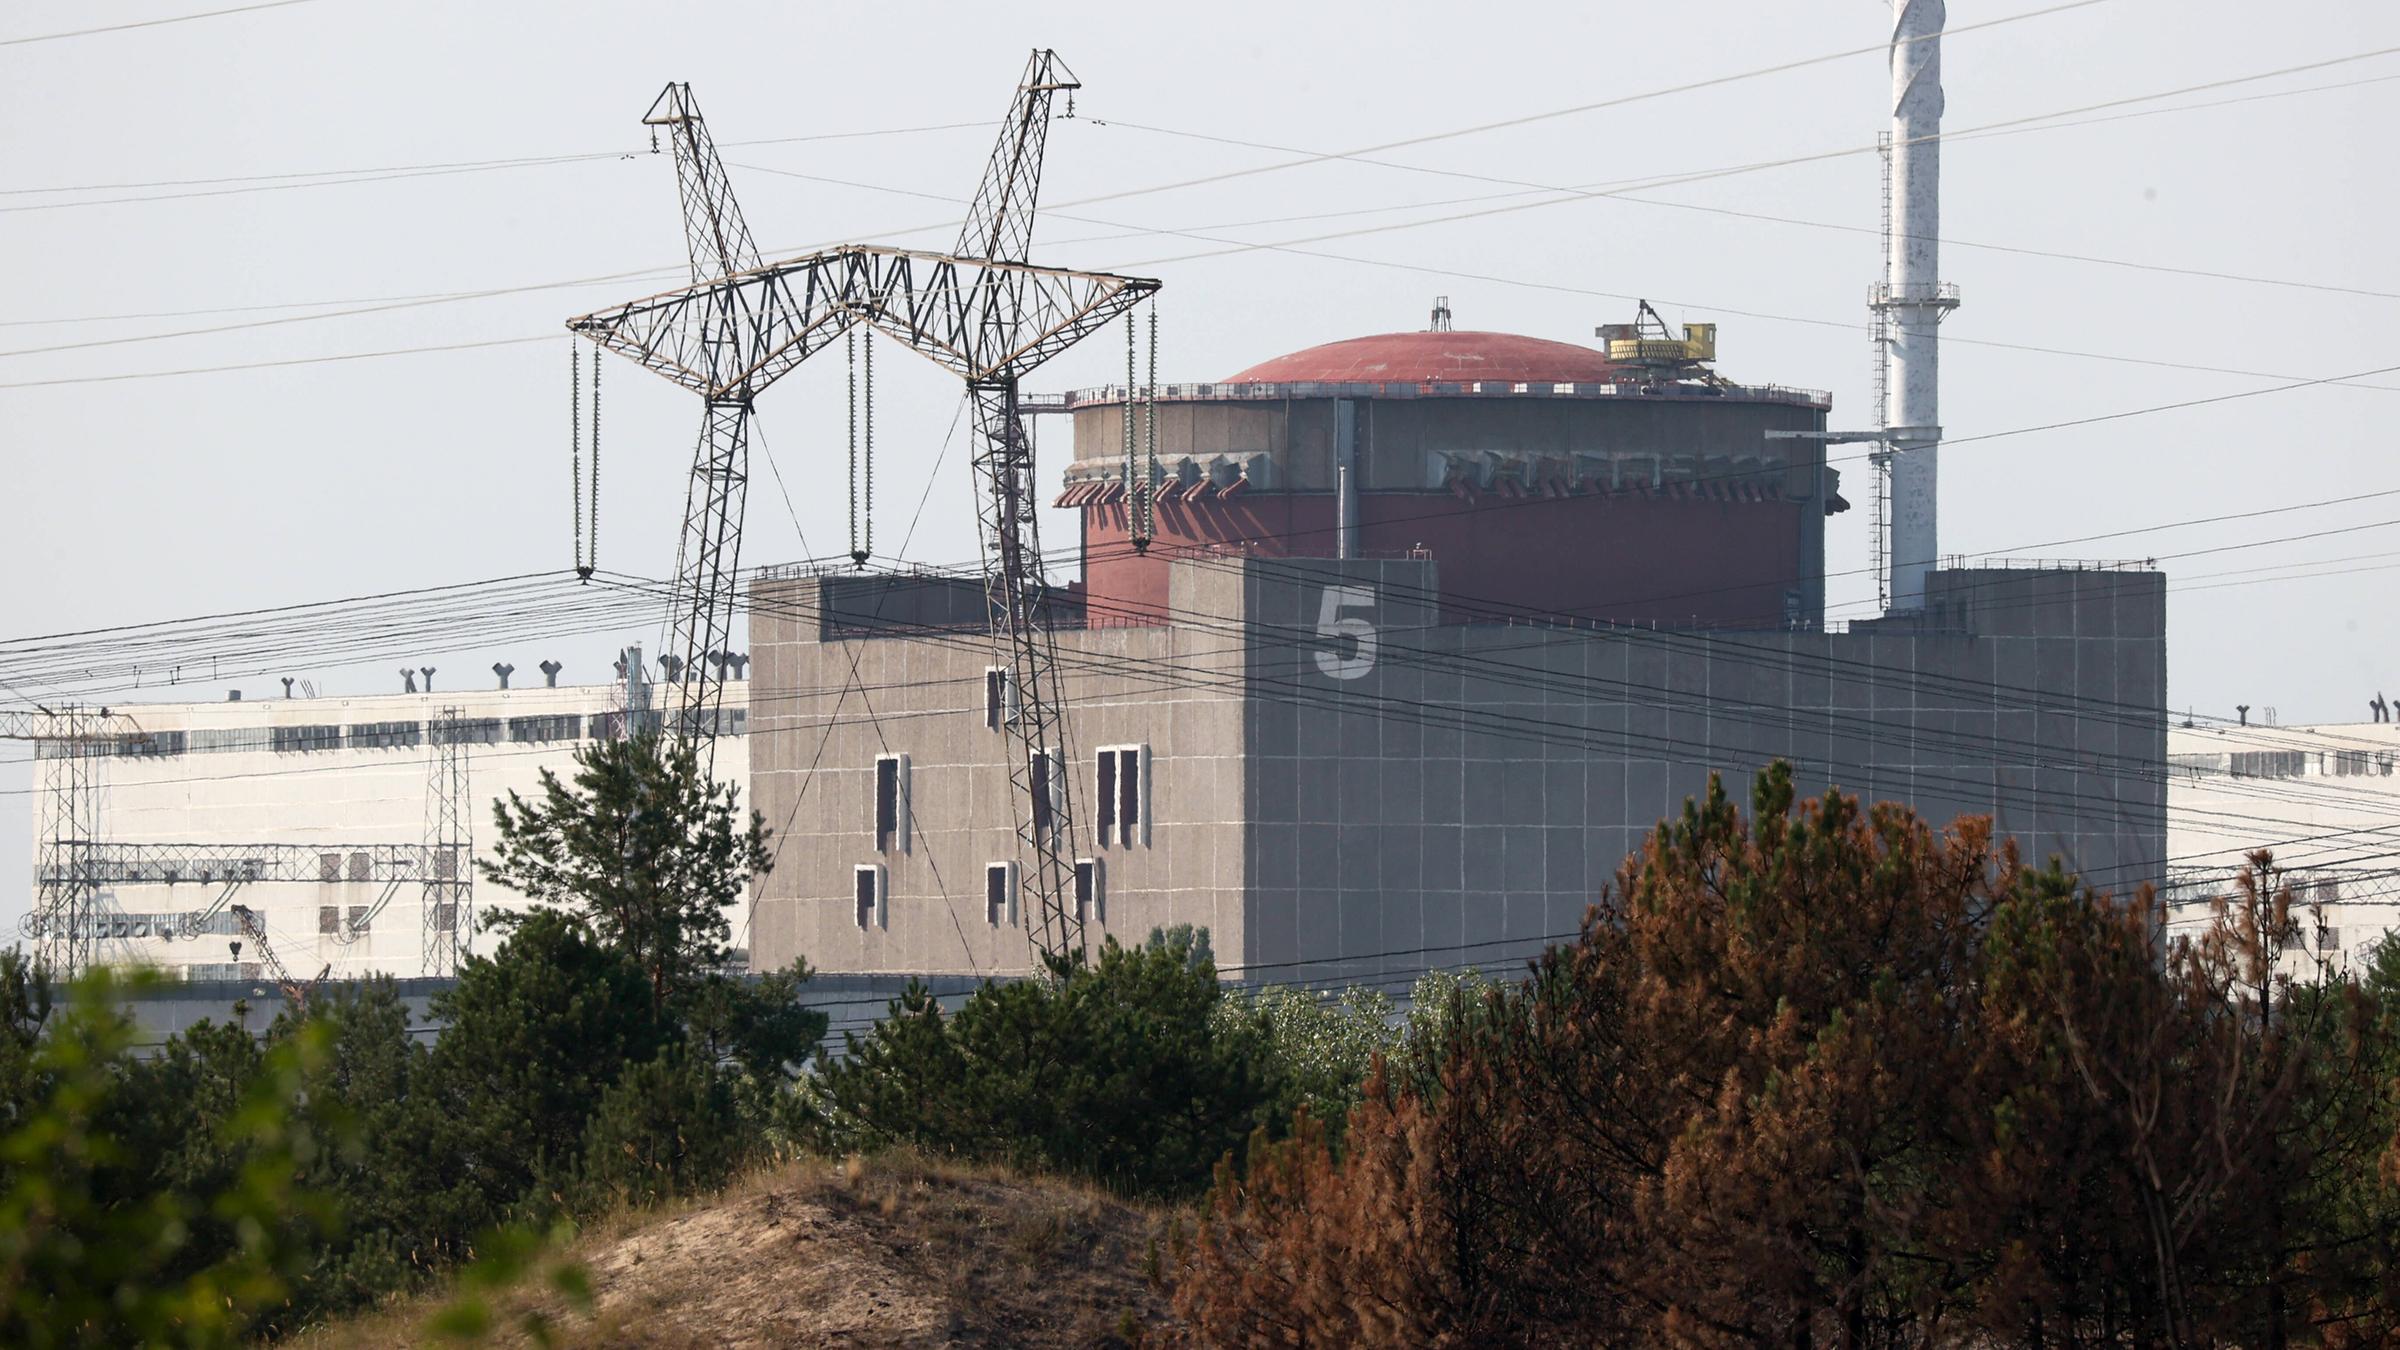 A view from the Zaporizhia nuclear power plant